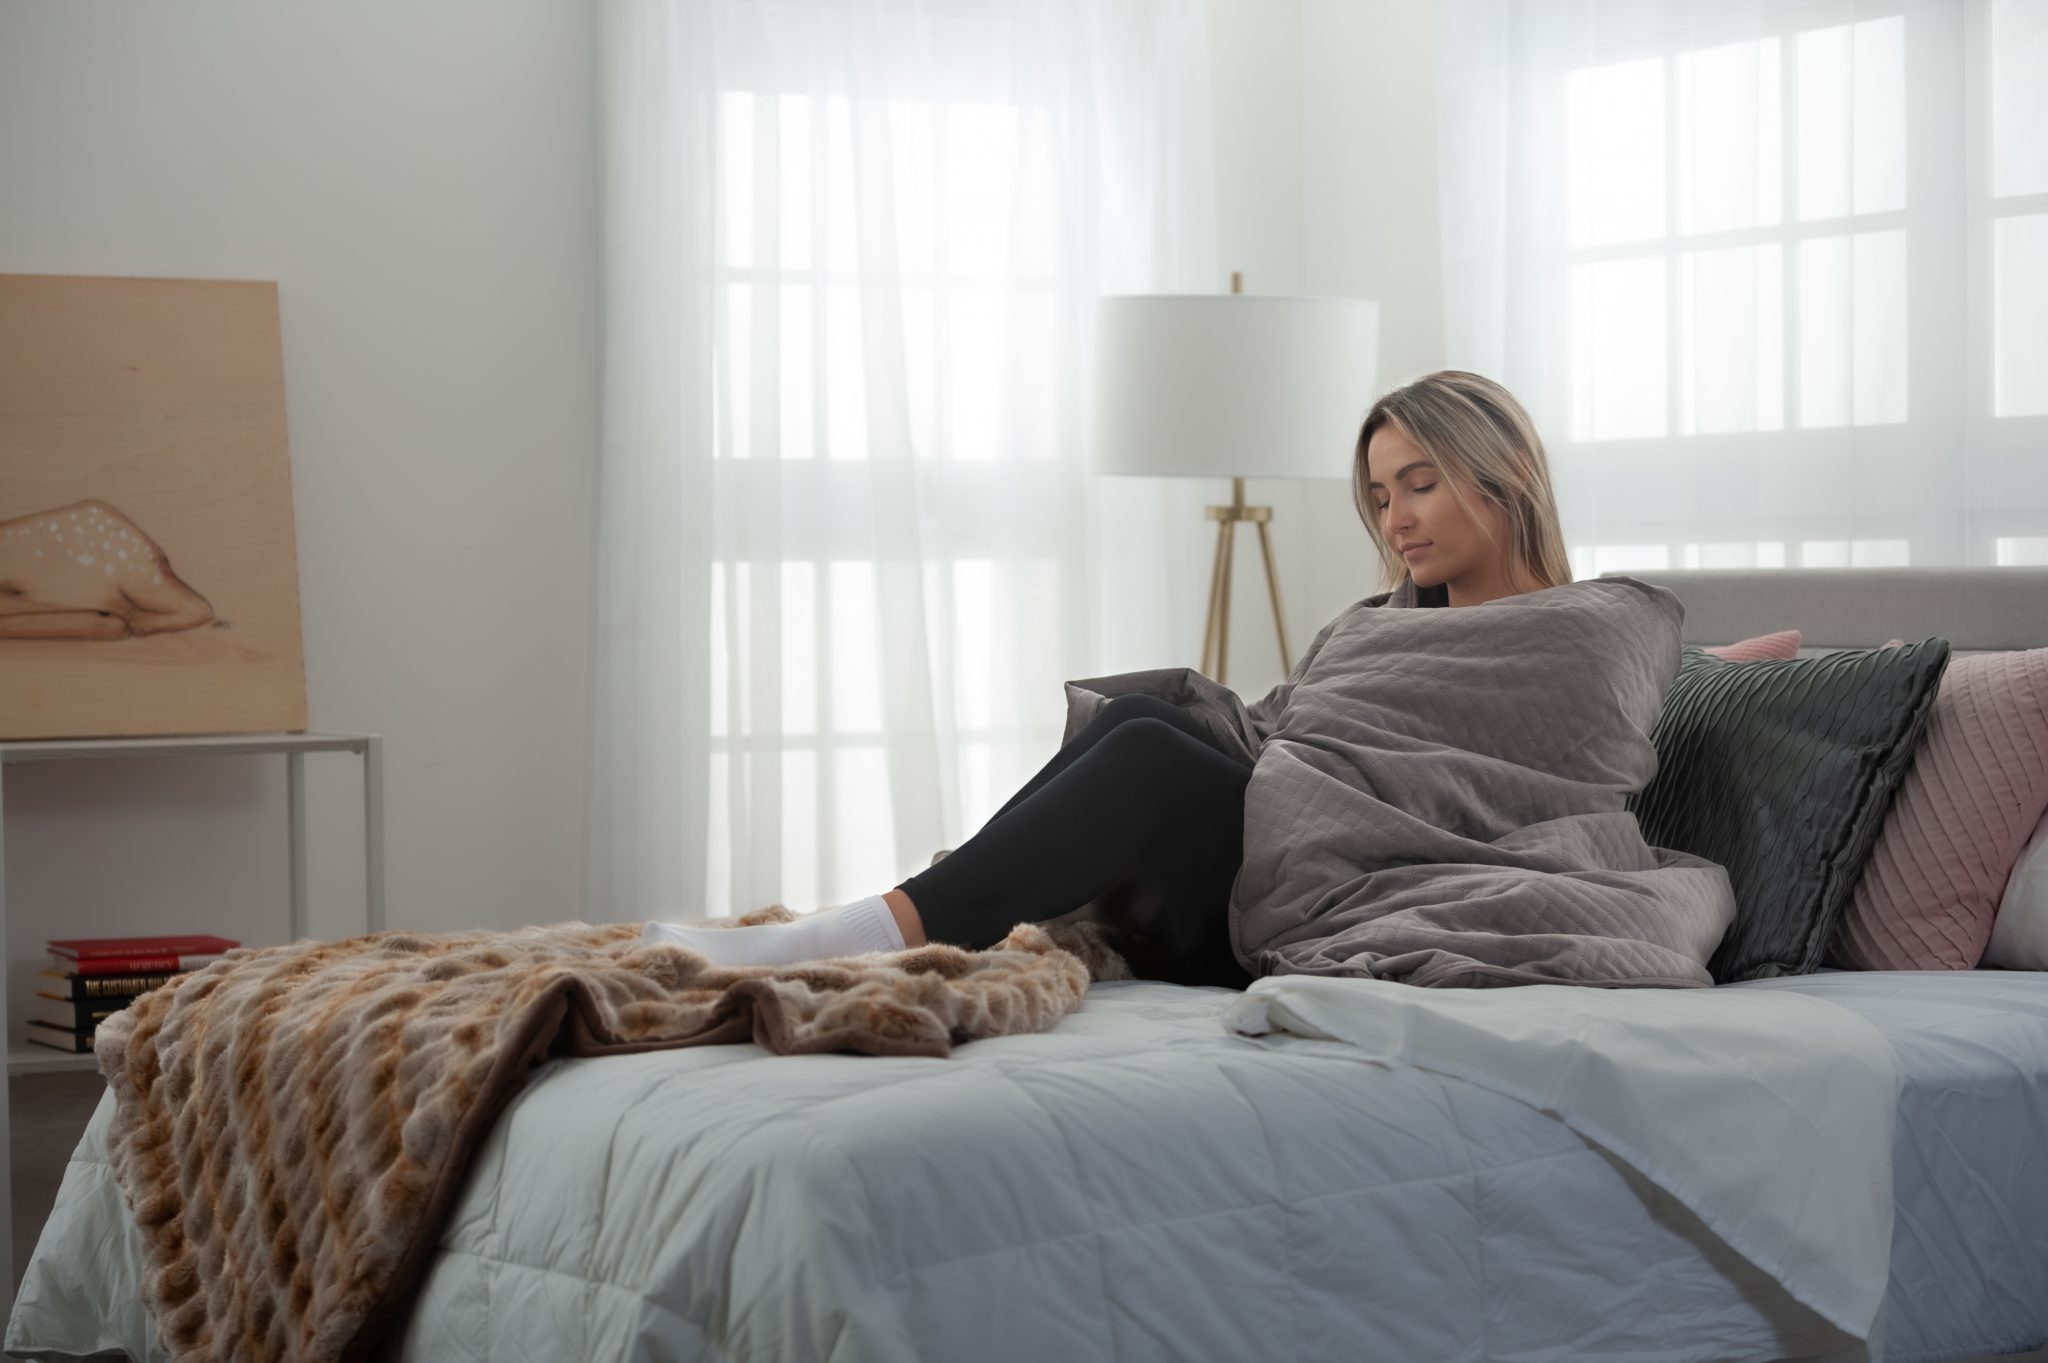 The Pros And Cons Of Using A Weighted Blanket - 2022 Guide - Verge Campus